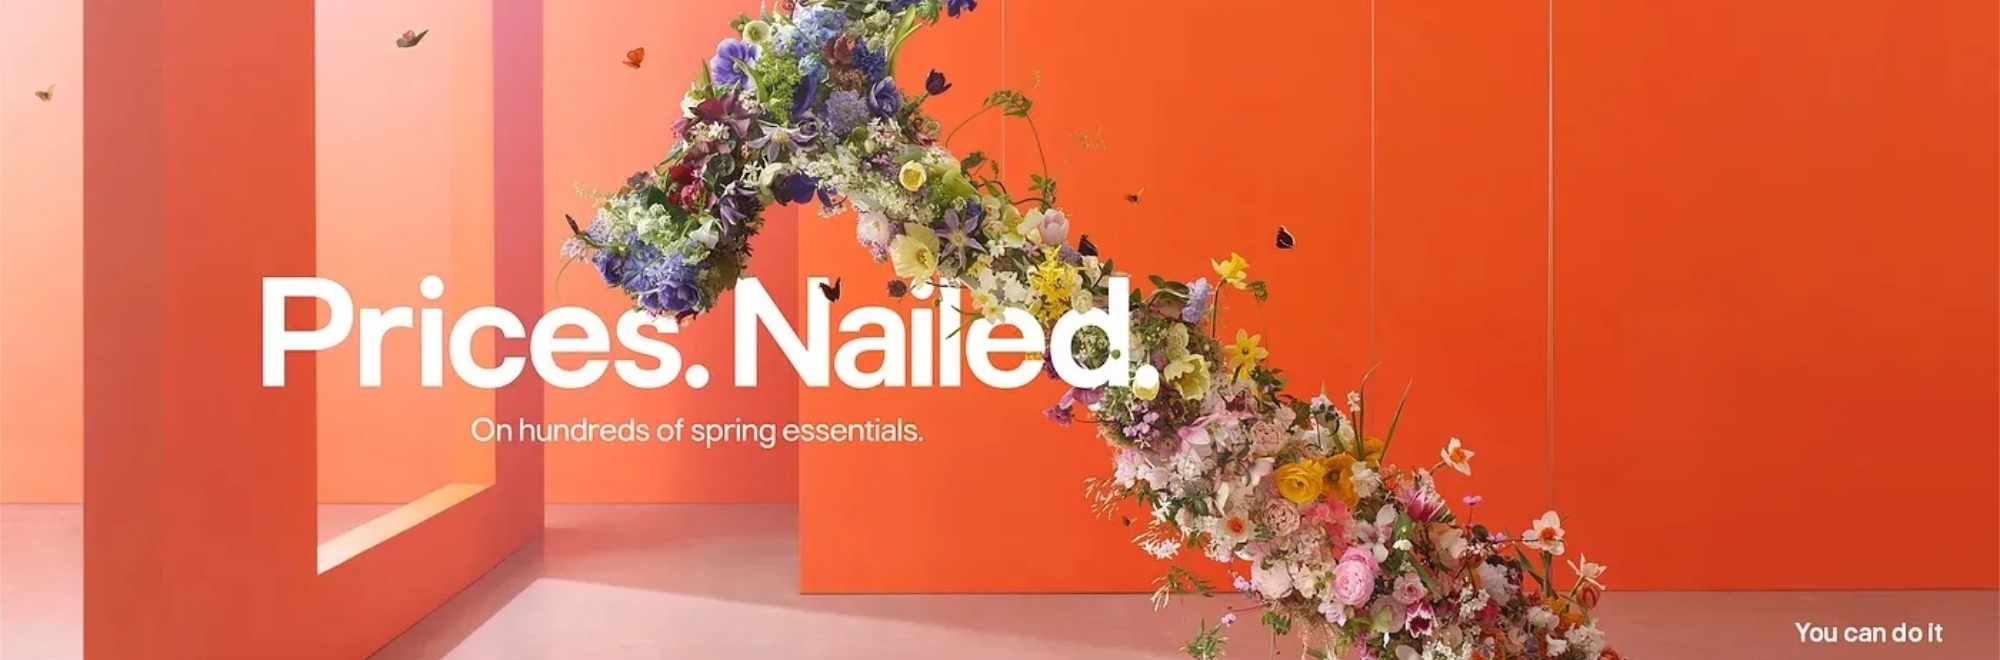 B&Q & Uncommon continue to make value artful with iconic installation welcoming Spring